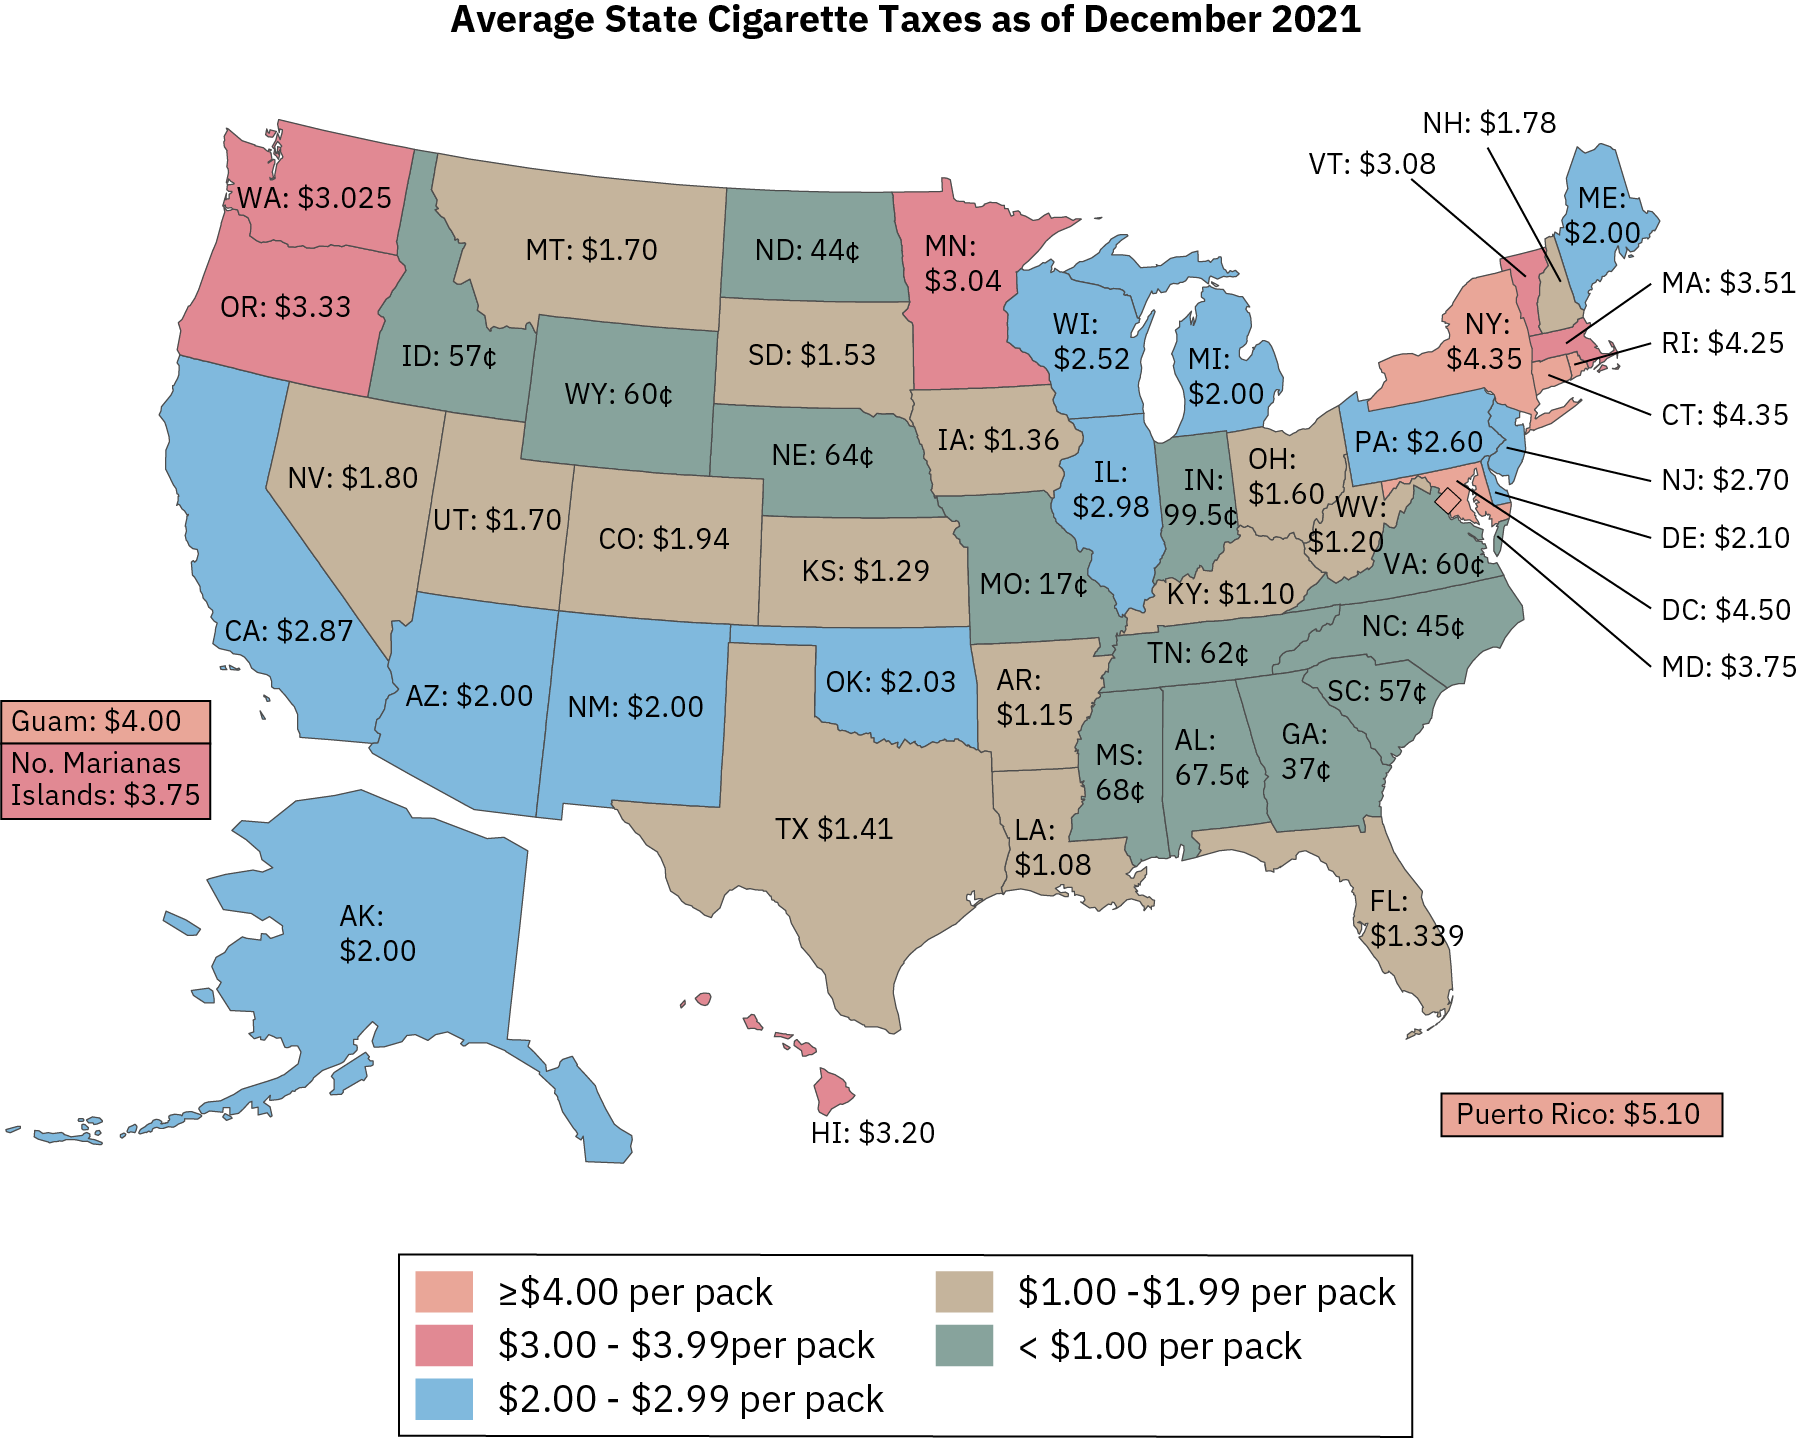 A map shows state cigarette tax rates as of December 2021. Thirteen states and territories have cigarette tax rates of less than $1.00 per pack; fifteen states and territories have cigarette tax rates between $1.00 and $1.99 per pack; twelve states and territories have a cigarette tax rate between $2.00 and $2.99 per pack; six states or territories have cigarette tax rates between $3.00 and $3.99 a pack; and four states or territories have cigarette tax rates higher than $4.00 a pack. Missouri’s tax rate is the lowest, at 17 cents a pack; Puerto Rico’s tax rate is the highest, at $5.10 a pack.